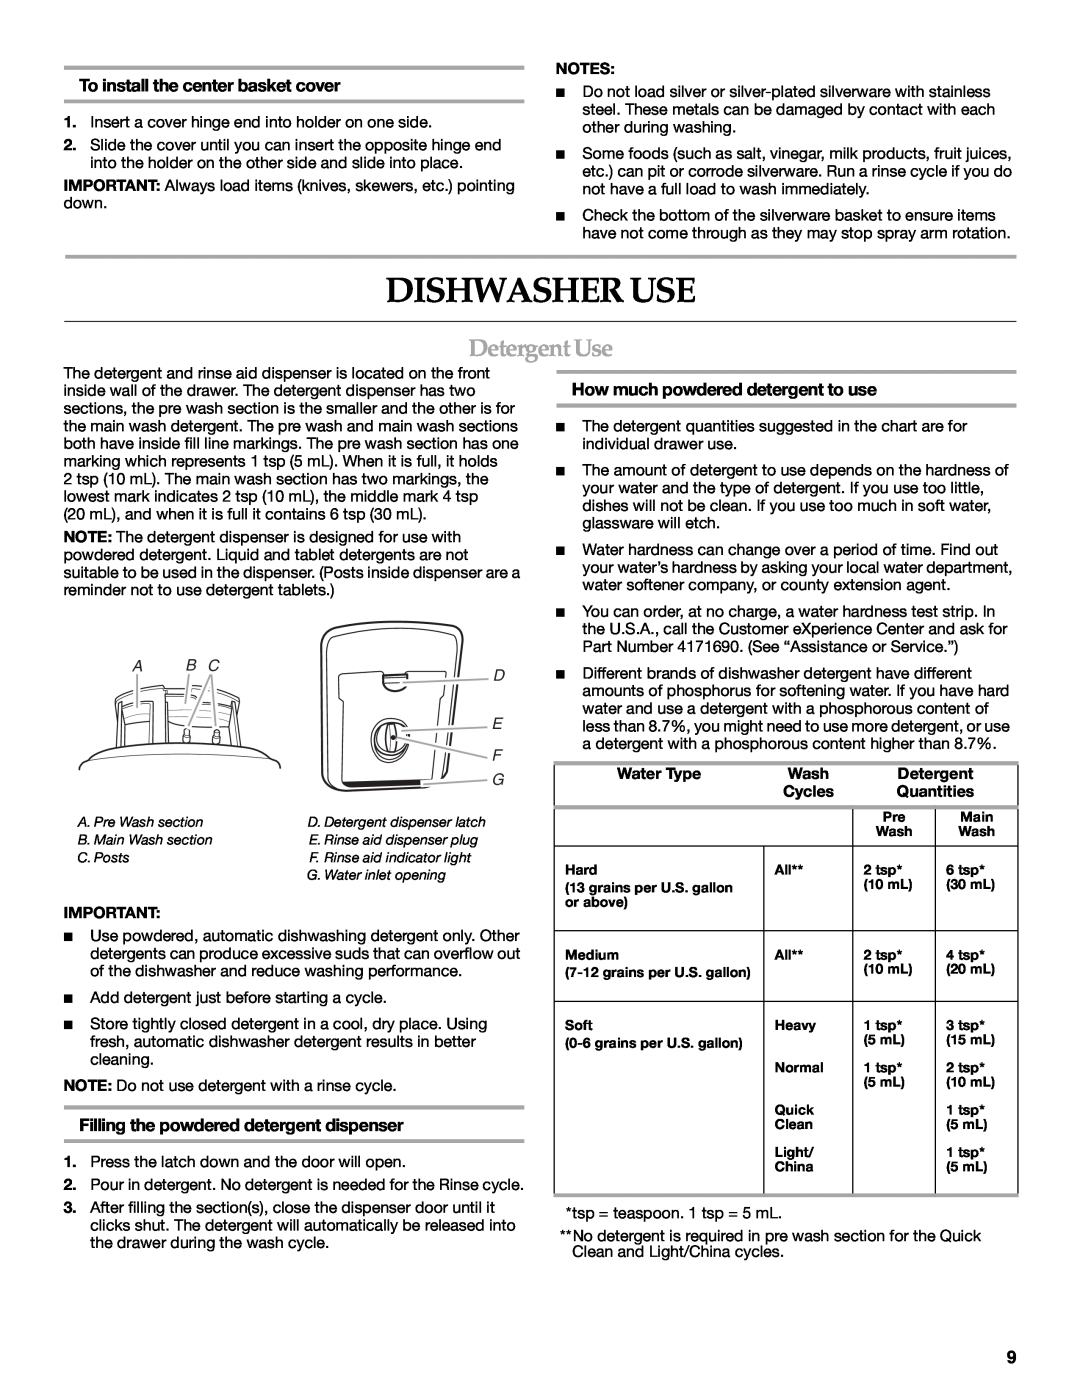 KitchenAid 8573754 Dishwasher Use, Detergent Use, To install the center basket cover, How much powdered detergent to use 